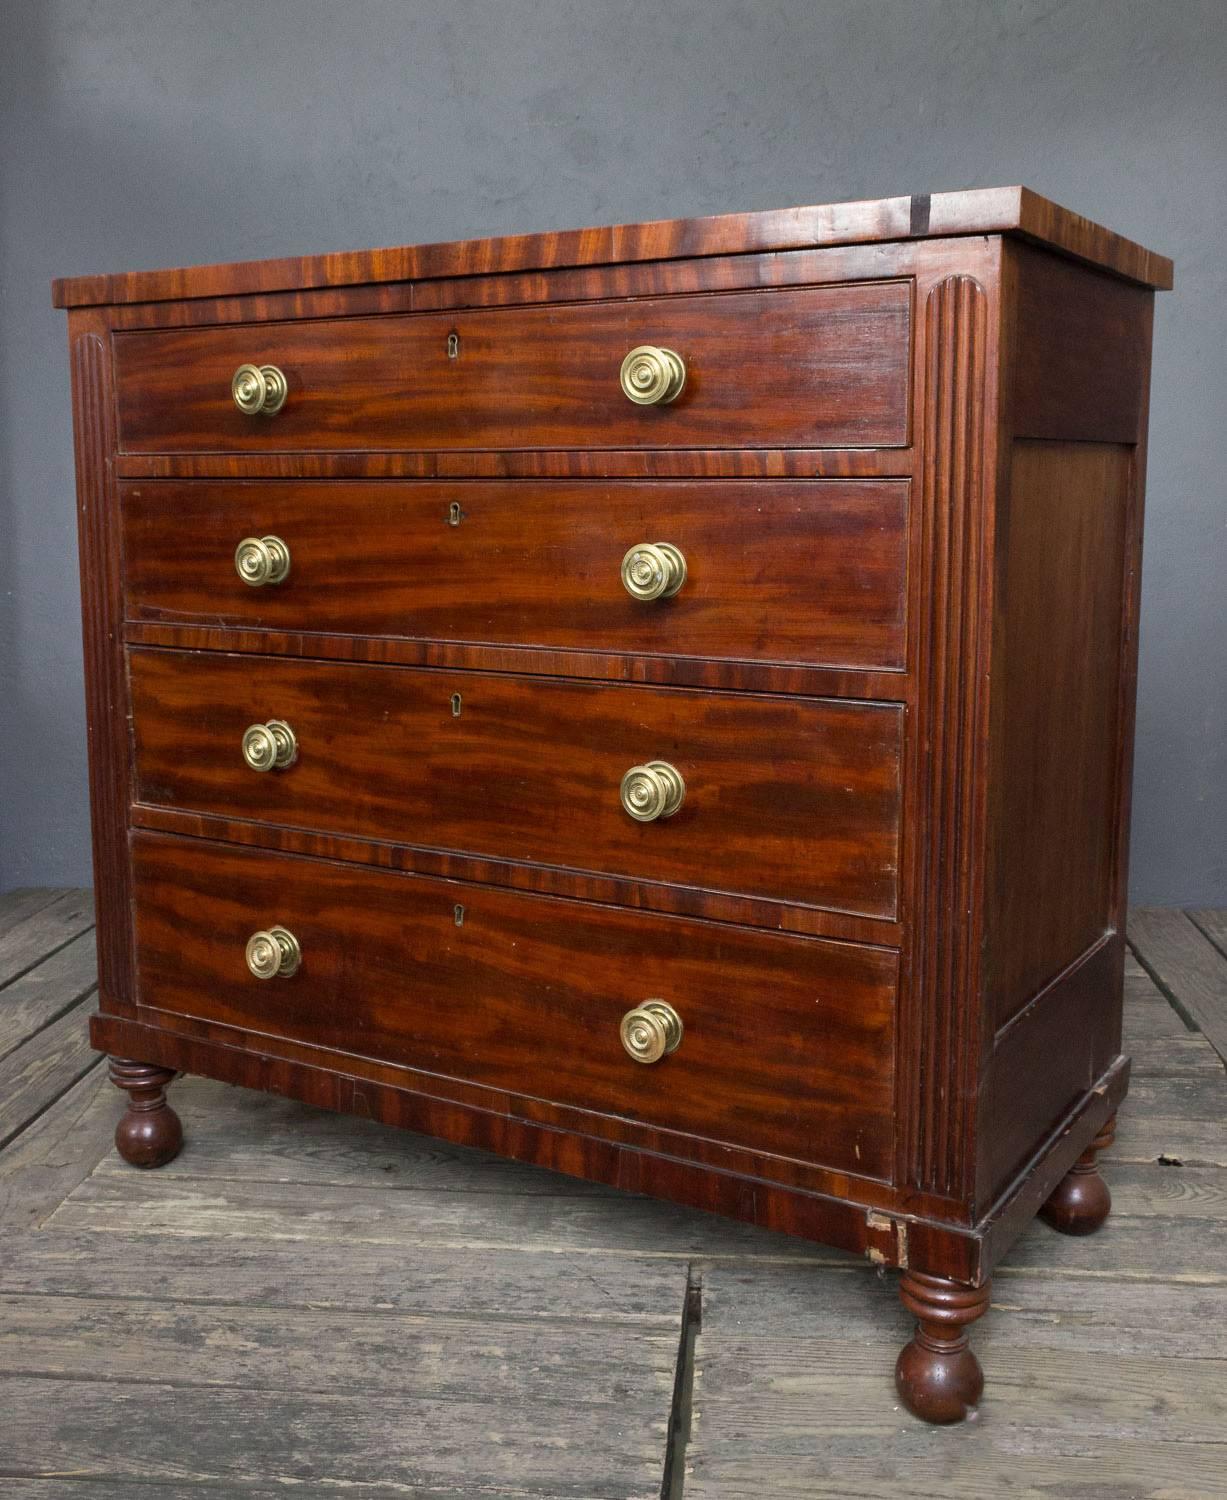 English mahogany chest of drawers with ball feet and original hardware. The top of the piece has a cracked which can be repaired. Sold as is.